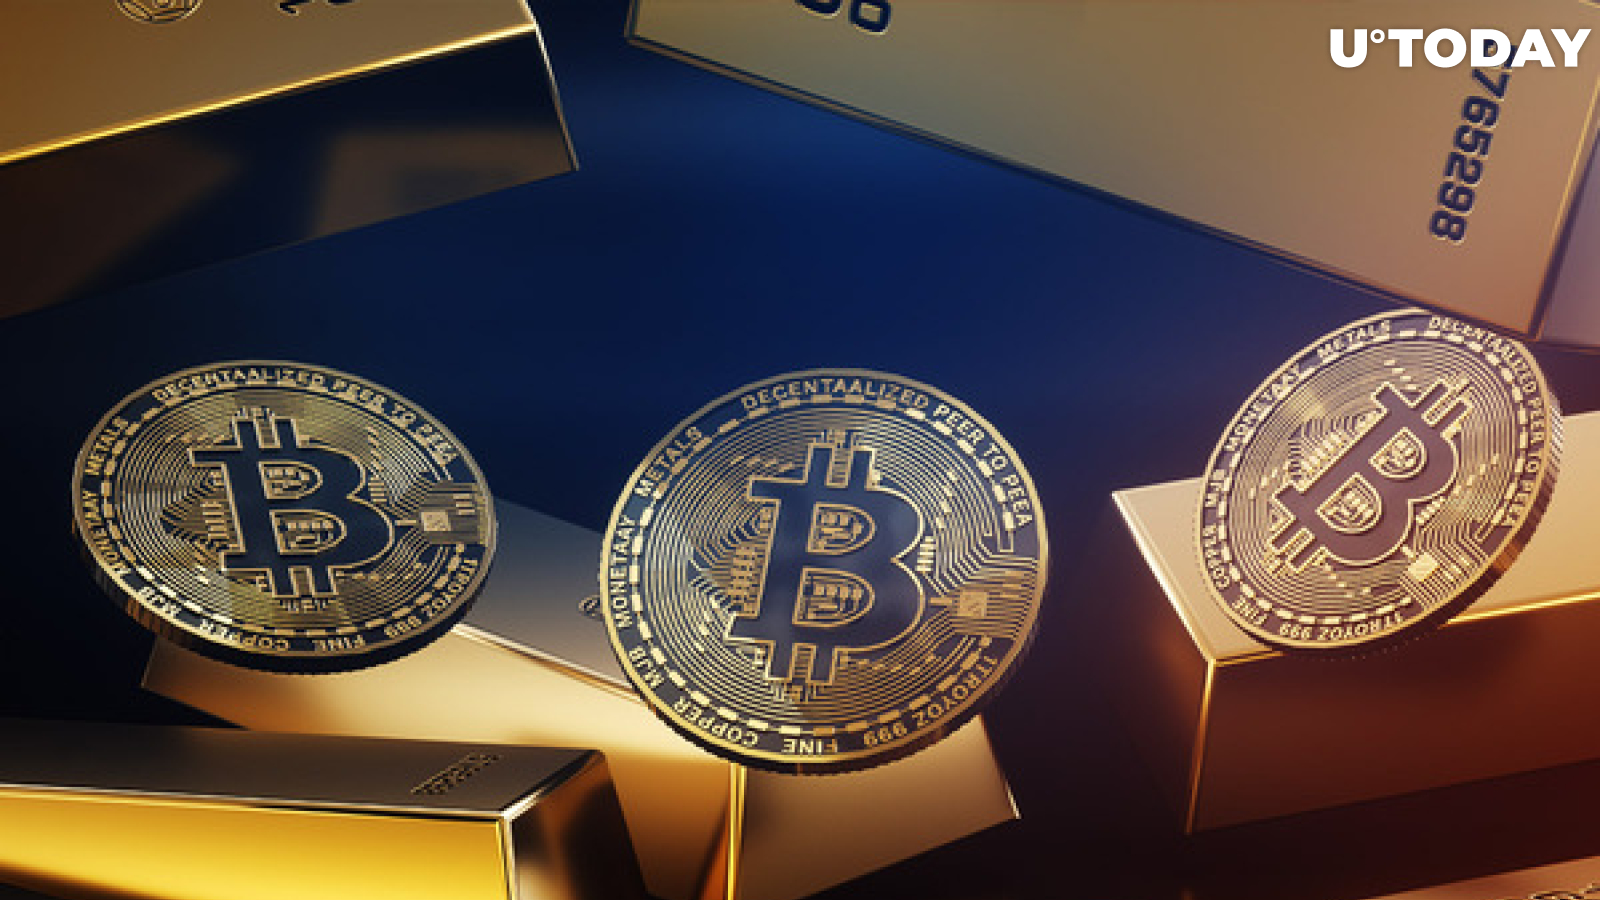 Growth for Gold This Year Is Blocked by Bitcoin: Bloomberg's Top Analyst